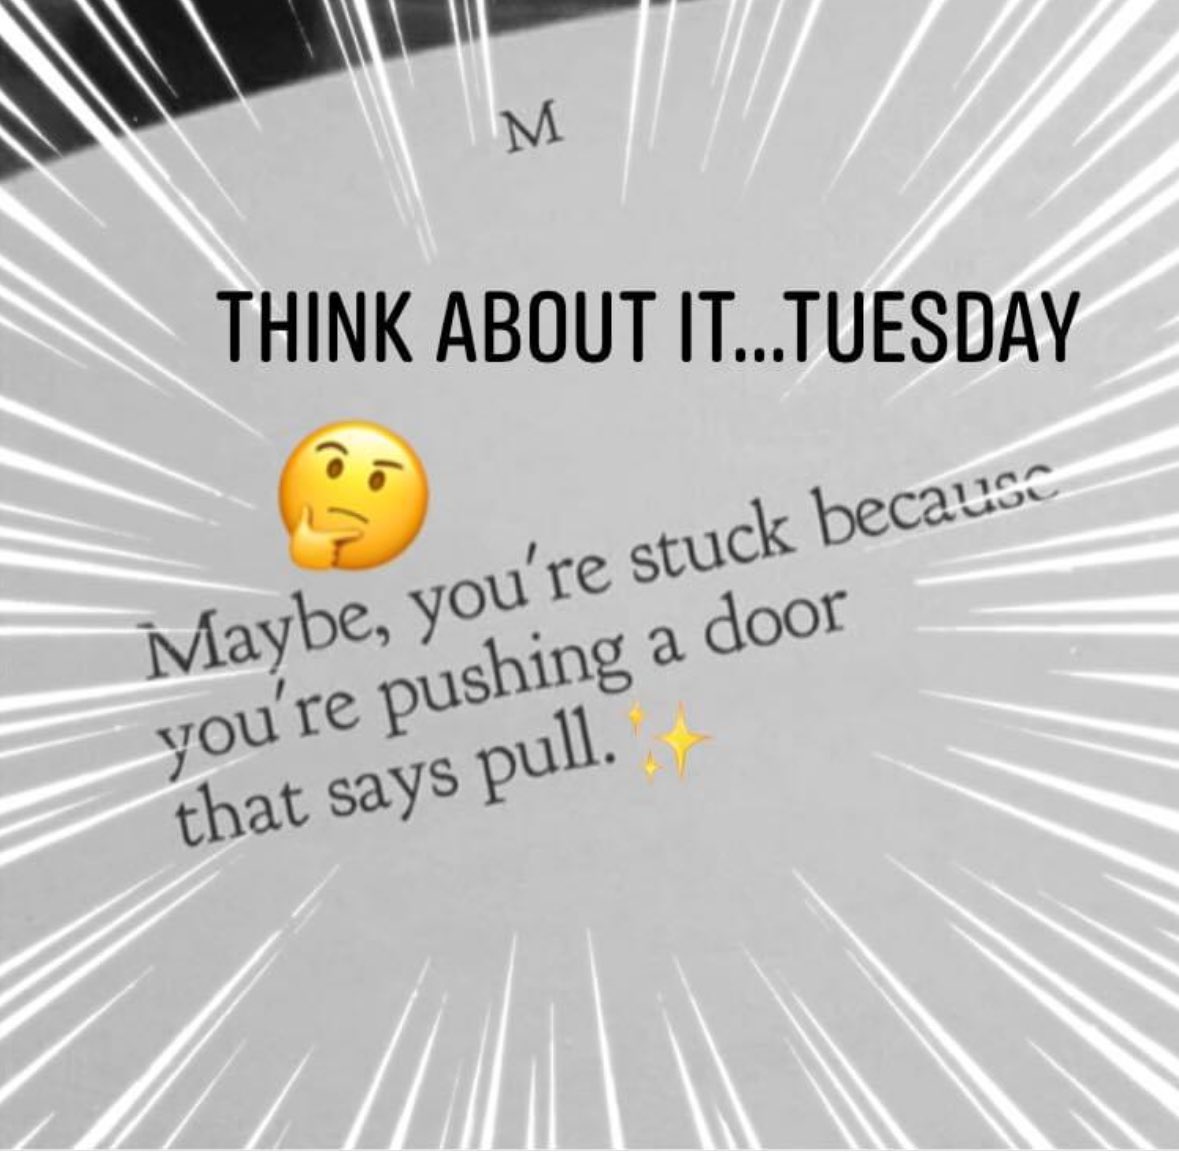 🤔Happy “Think” Tuesday! 🤭

Sometimes you don’t have
to PUSH so hard...
Sometimes it’s just a matter of 
PULLING...😉

#thinkaboutit #tuesday 
#push #pull #thankful #sacramento #realtor #tanyacurry
#thinkoutsidethebox 📦